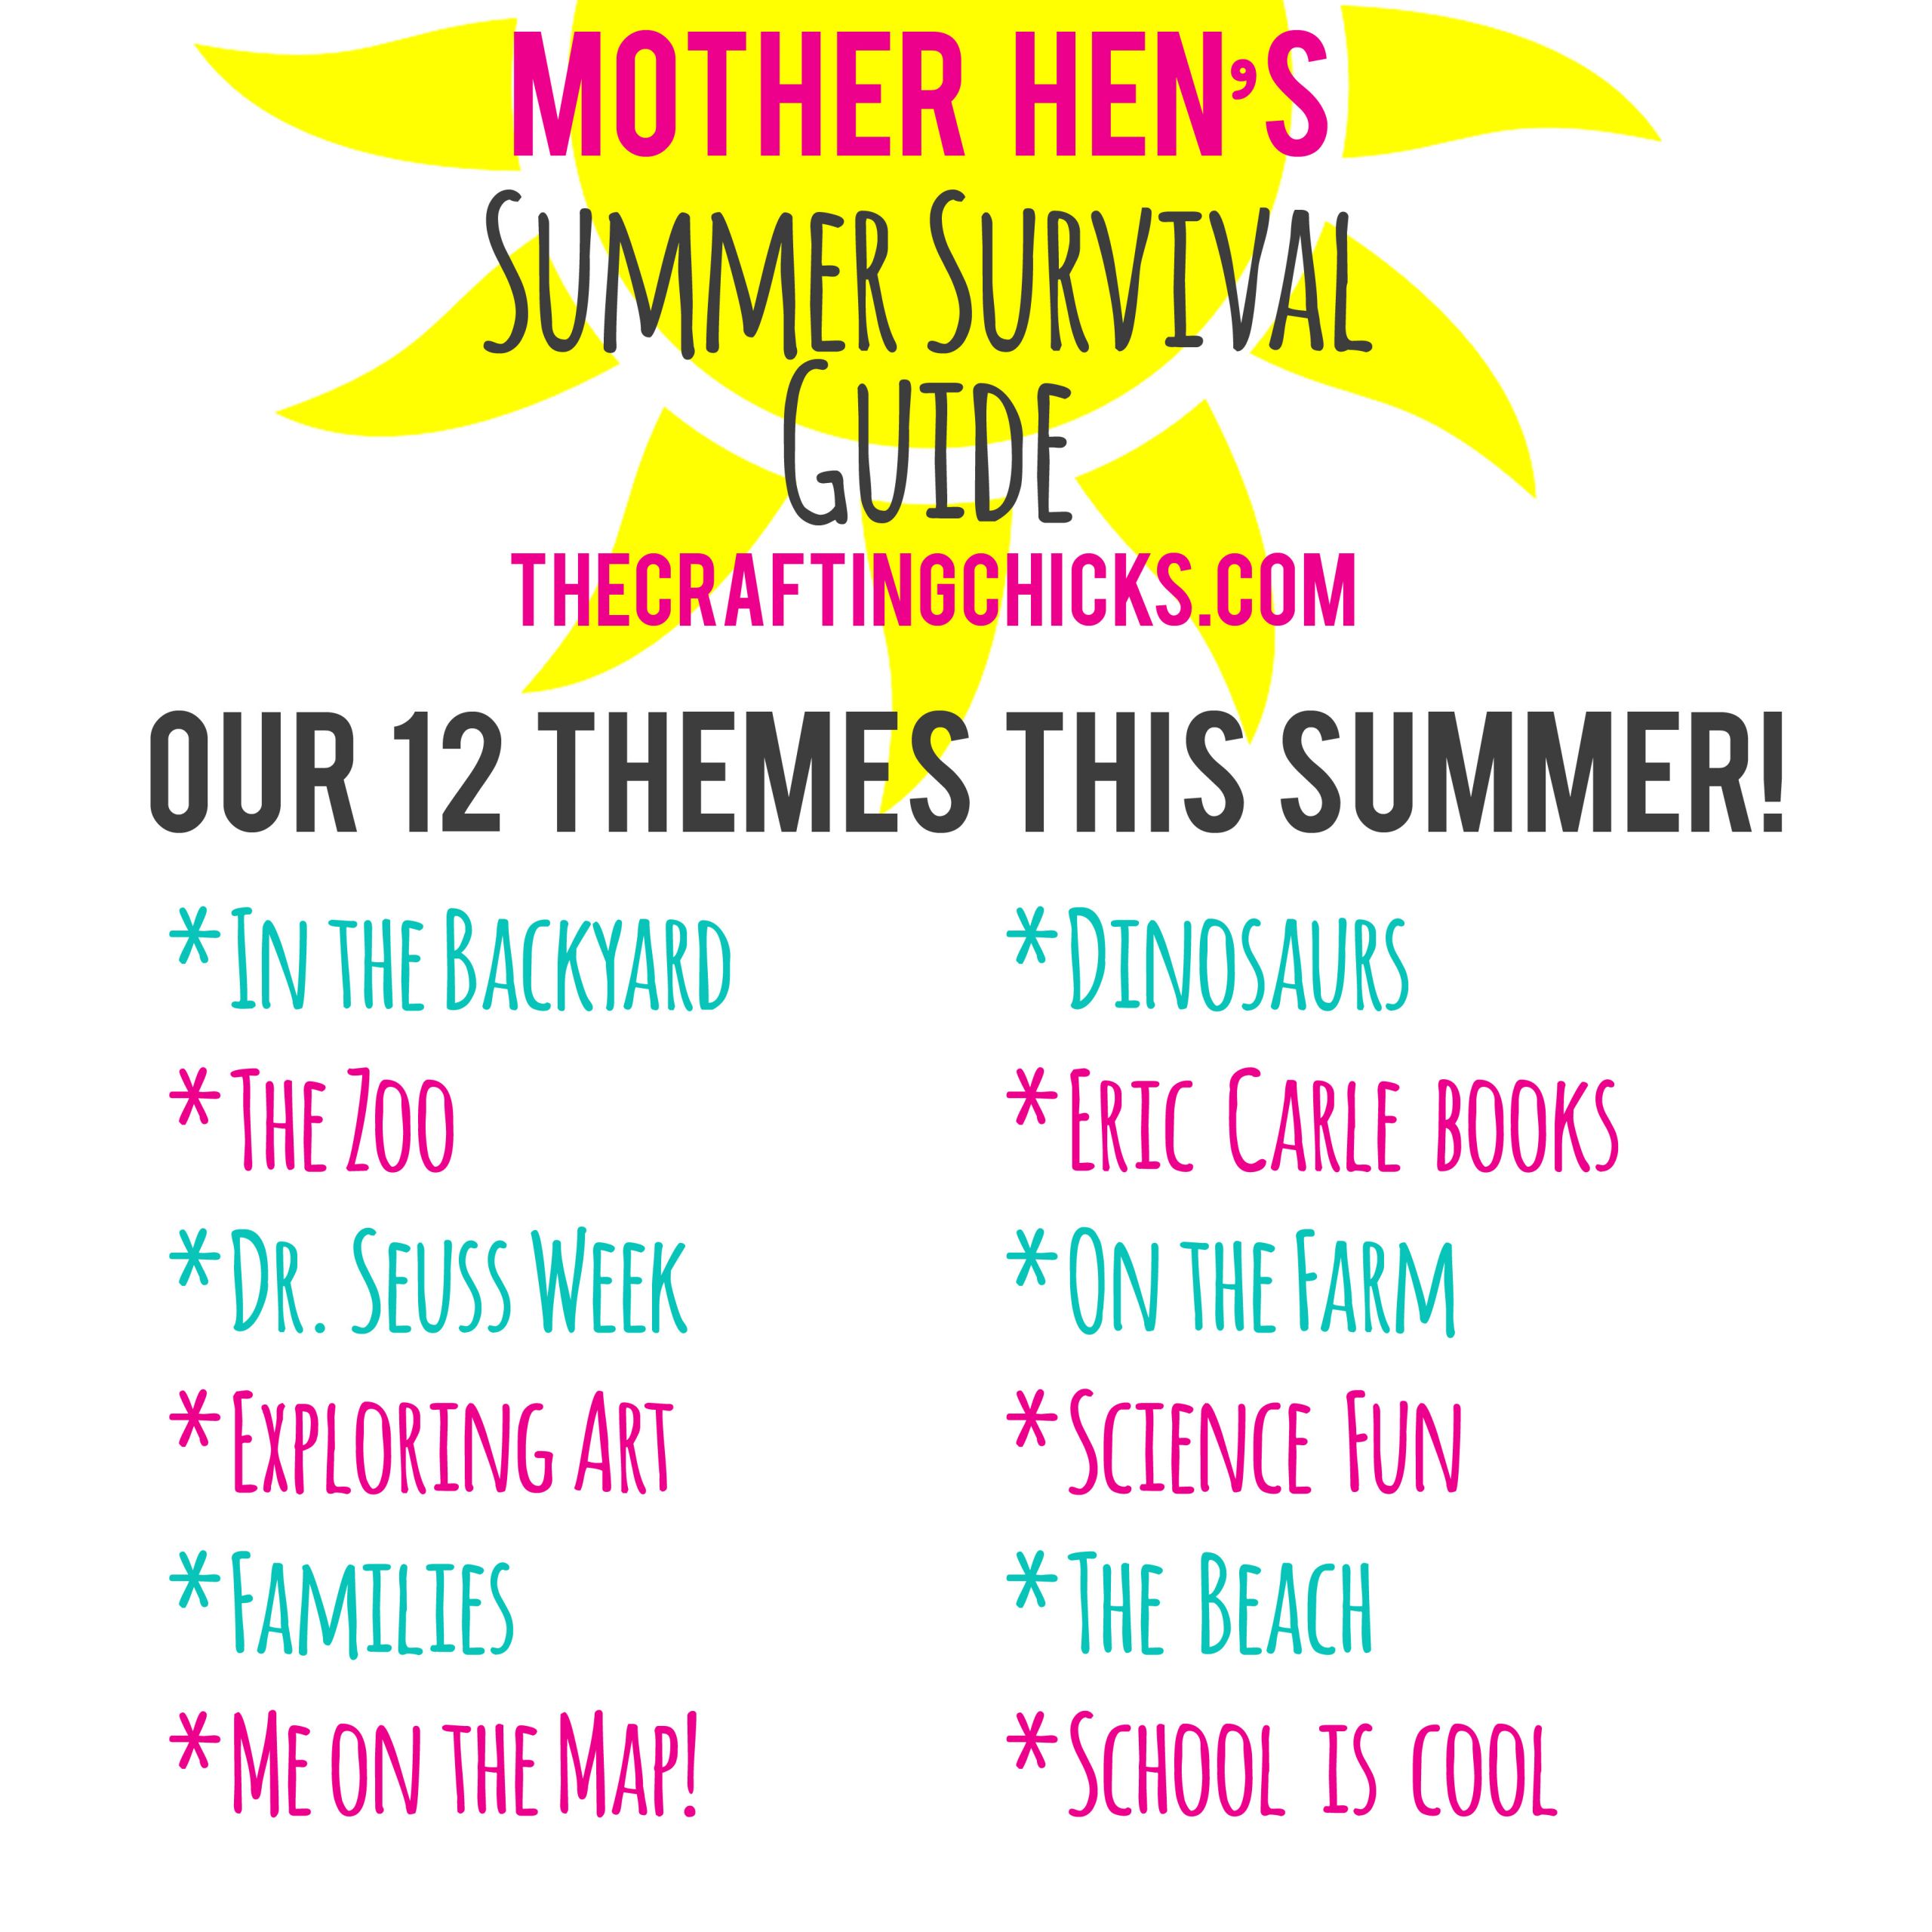 Summer Camp Ideas For Preschool
 Mother Hen Summer Survival Guide 2016 The Crafting Chicks